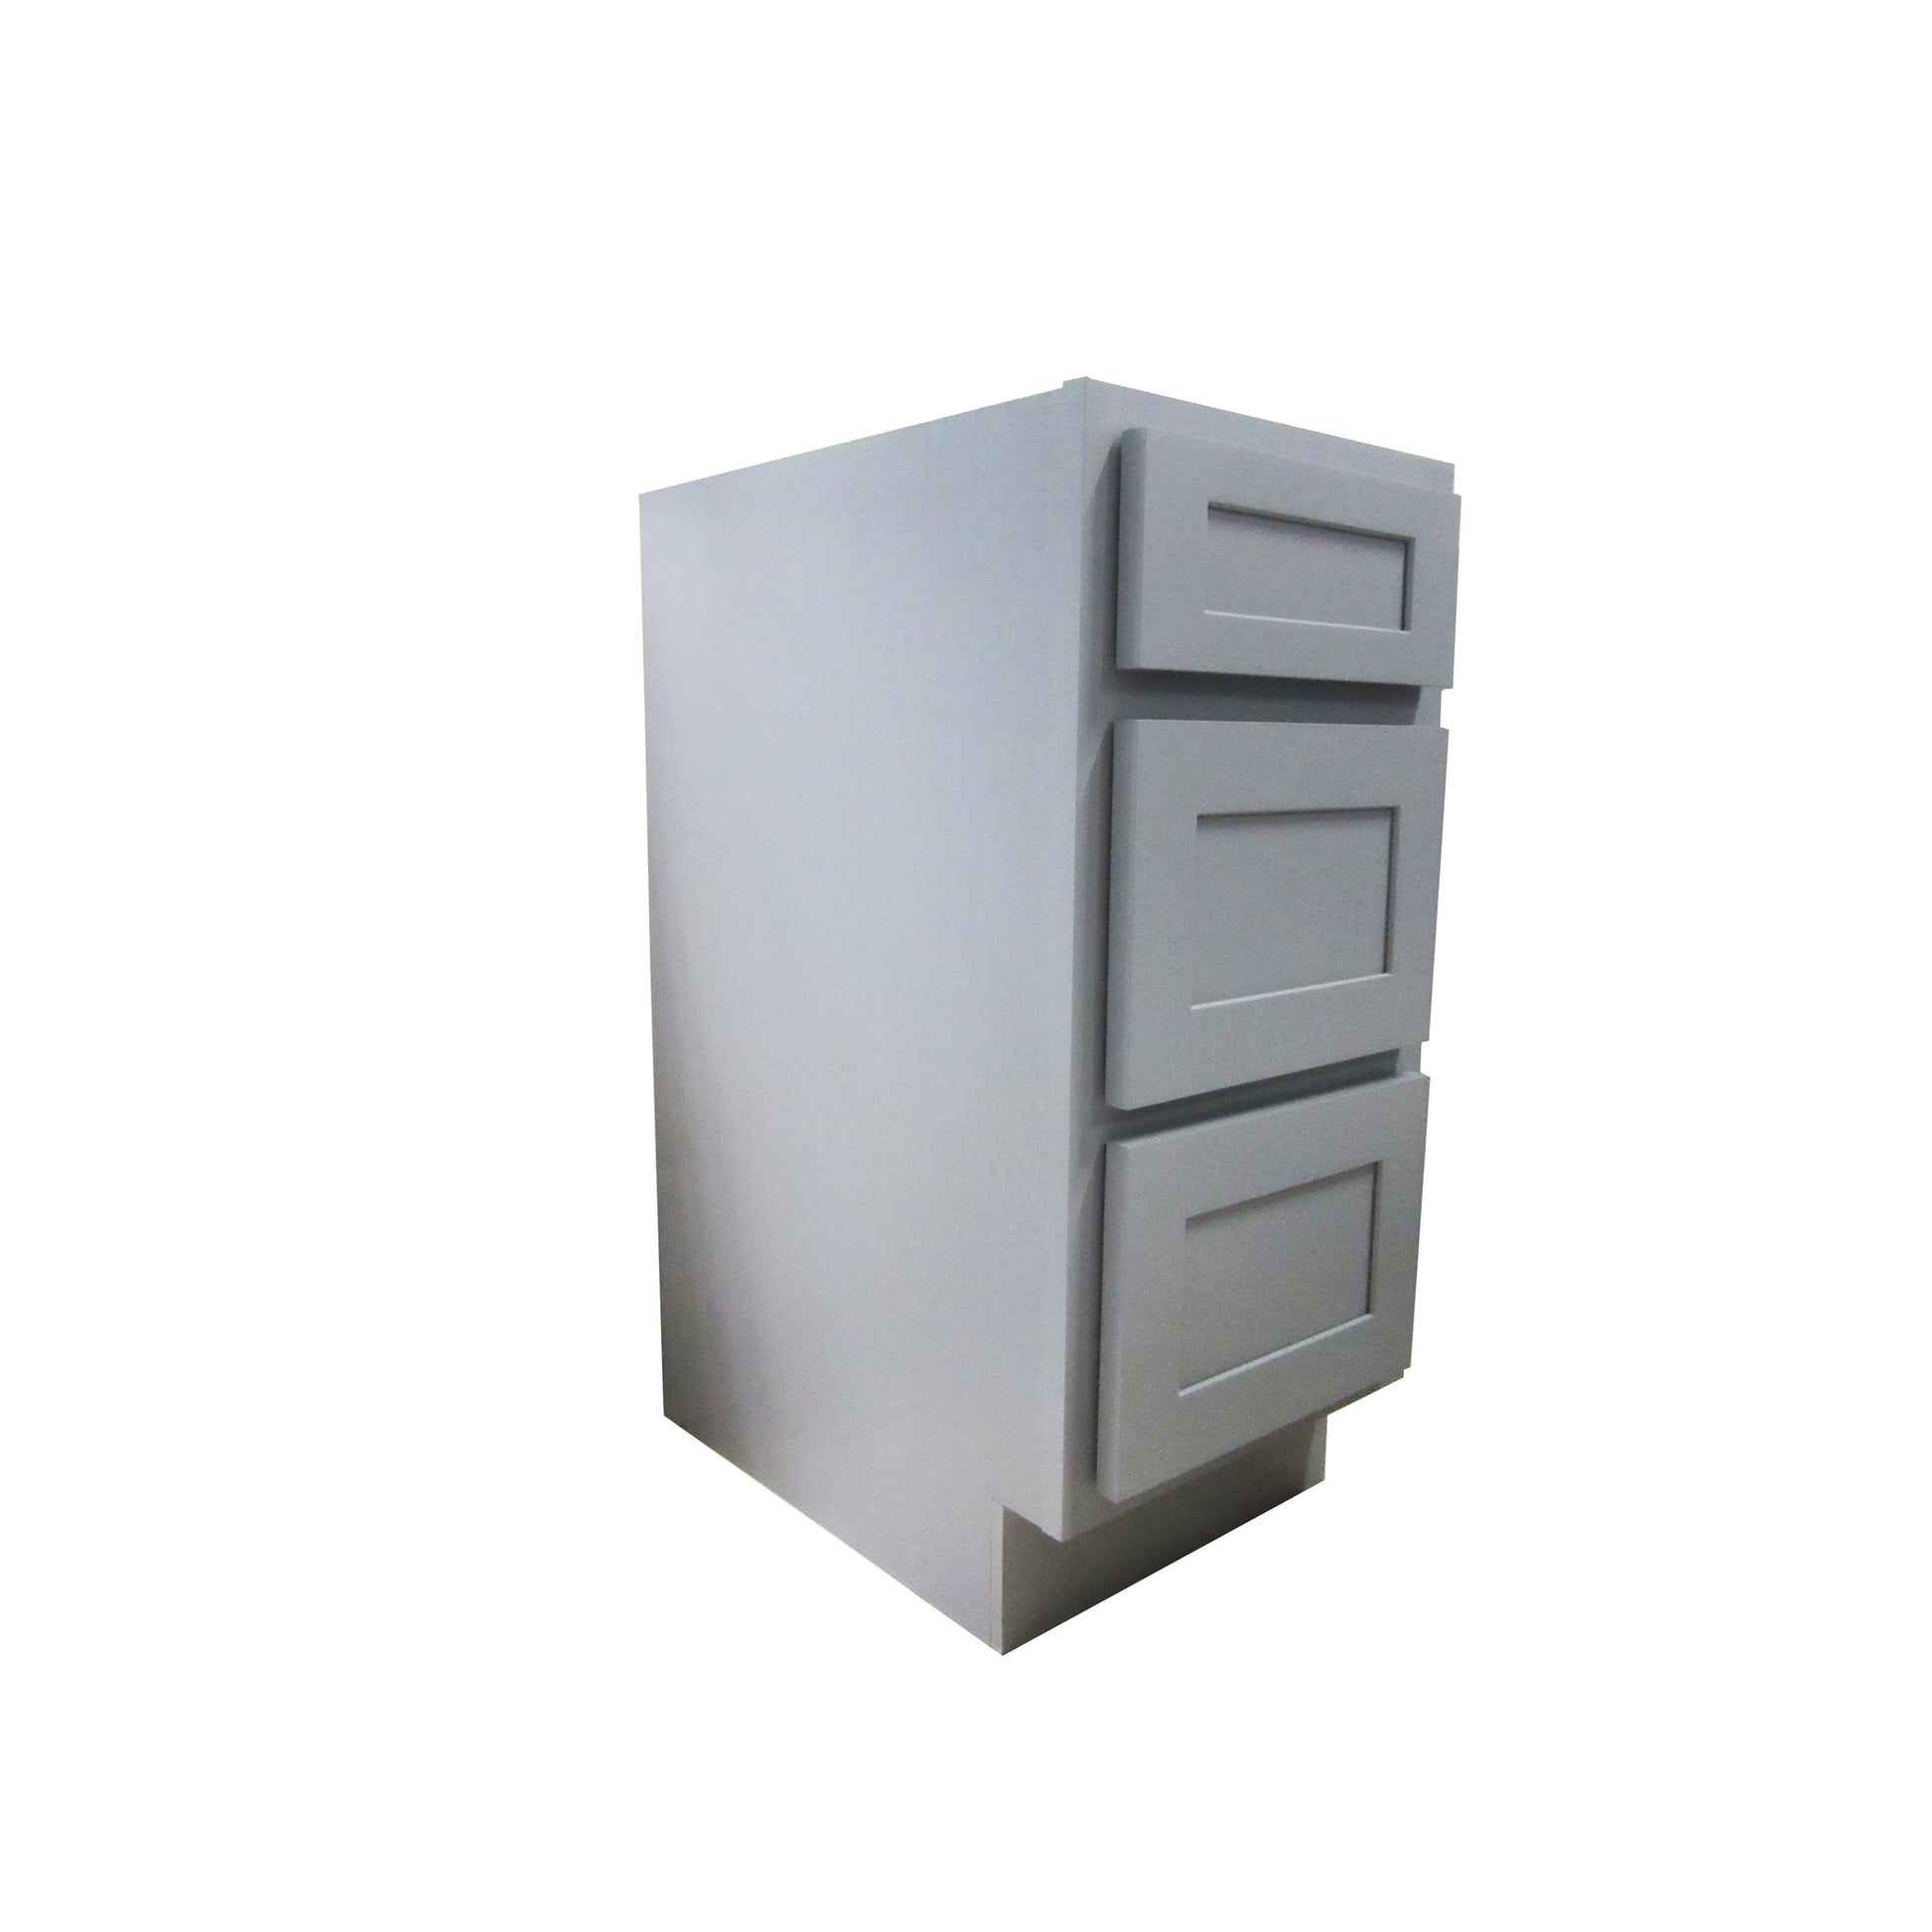 Vanity Art 15" Gray Single Freestanding Solid Wood Vanity Cabinet With 3 Soft Closing Drawers